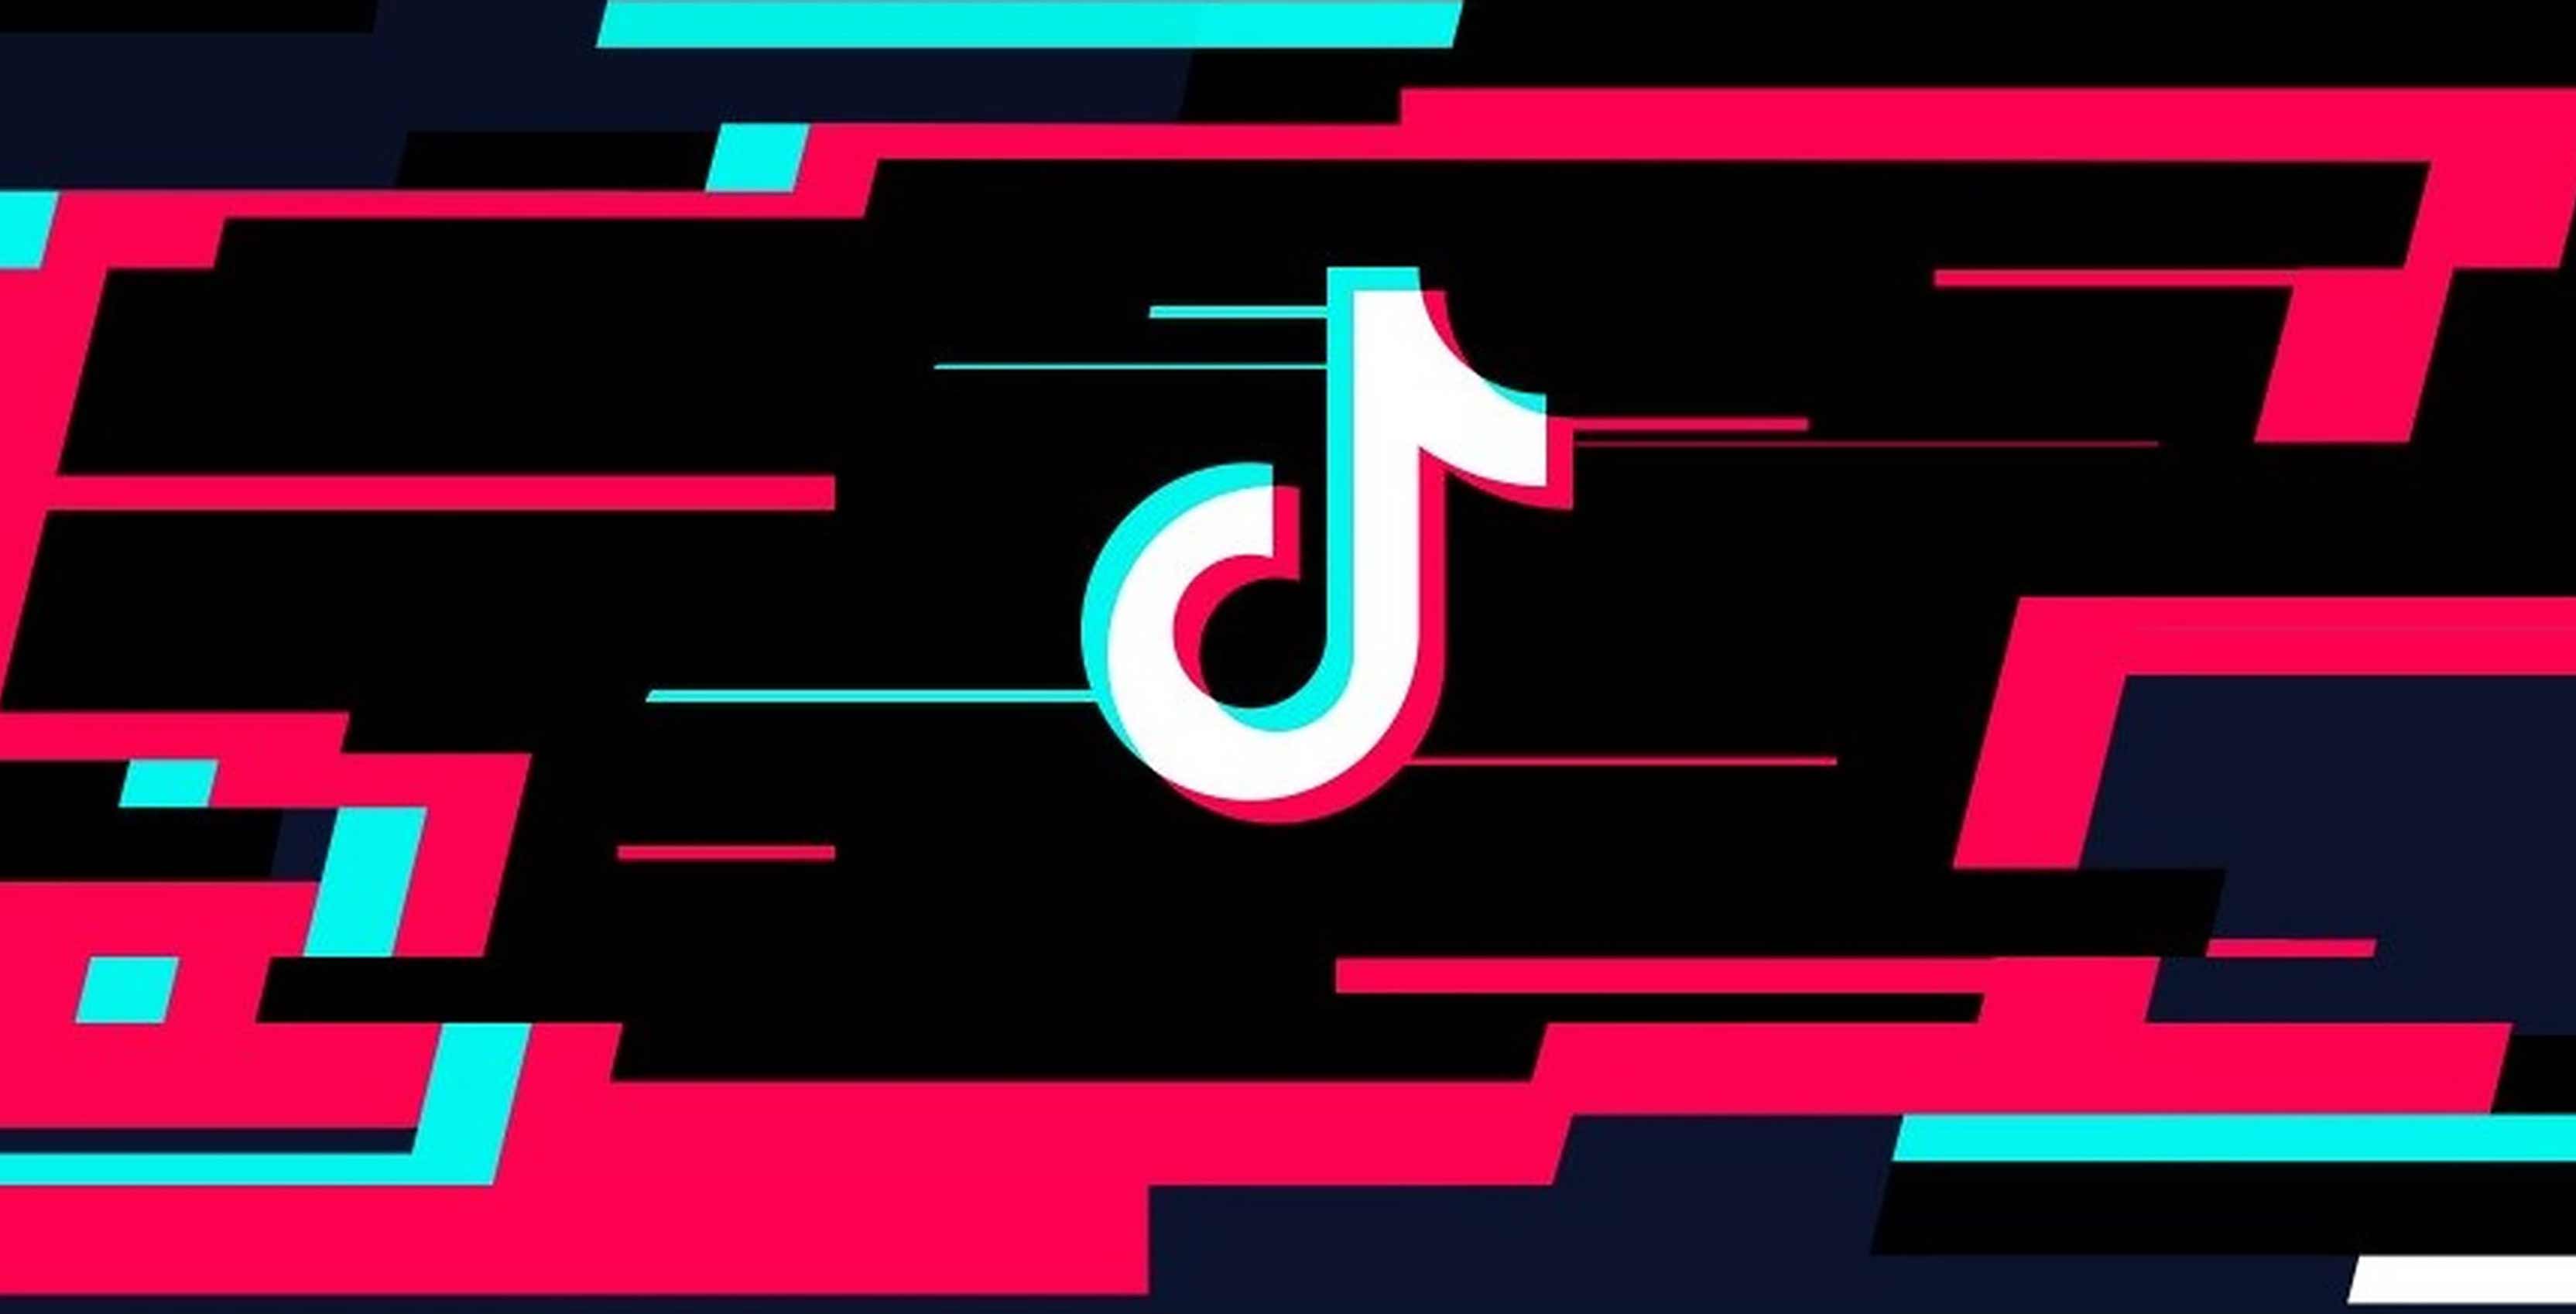 how to download tik tok videos in iphone